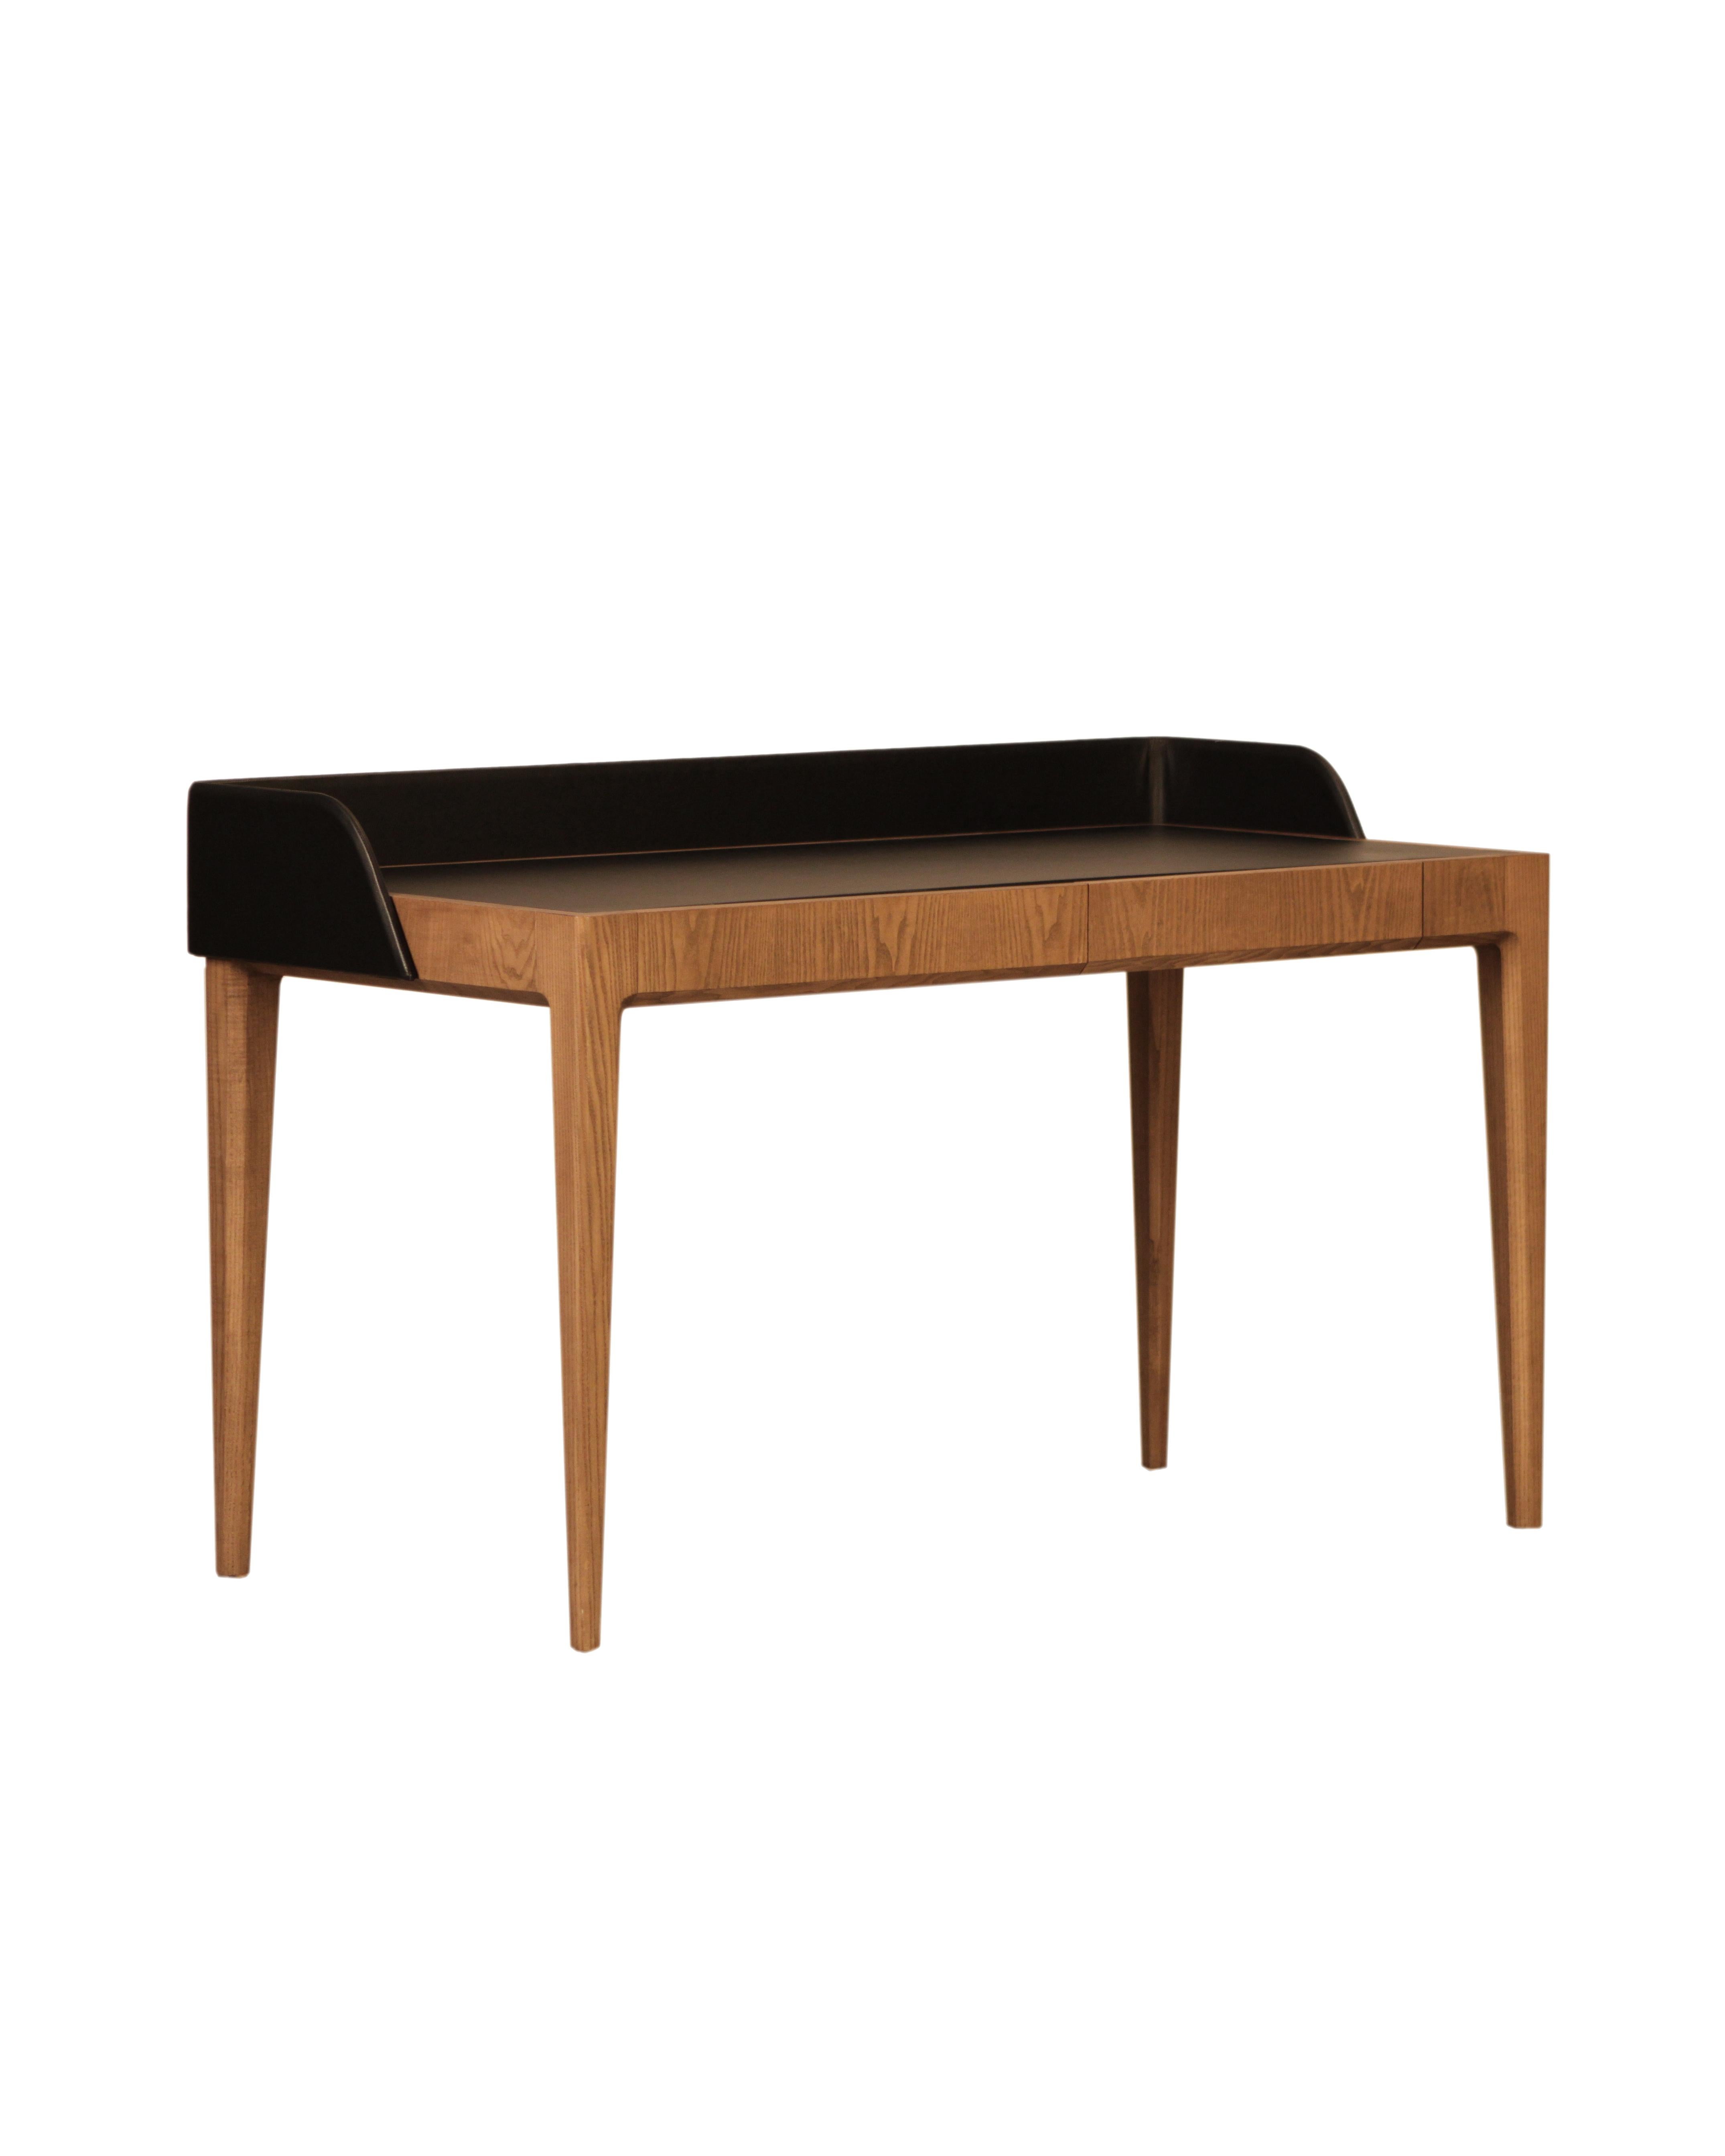 Hand-Crafted Contemporary Desk Made of Ashwood with Leather Flapping Top, by Morelato